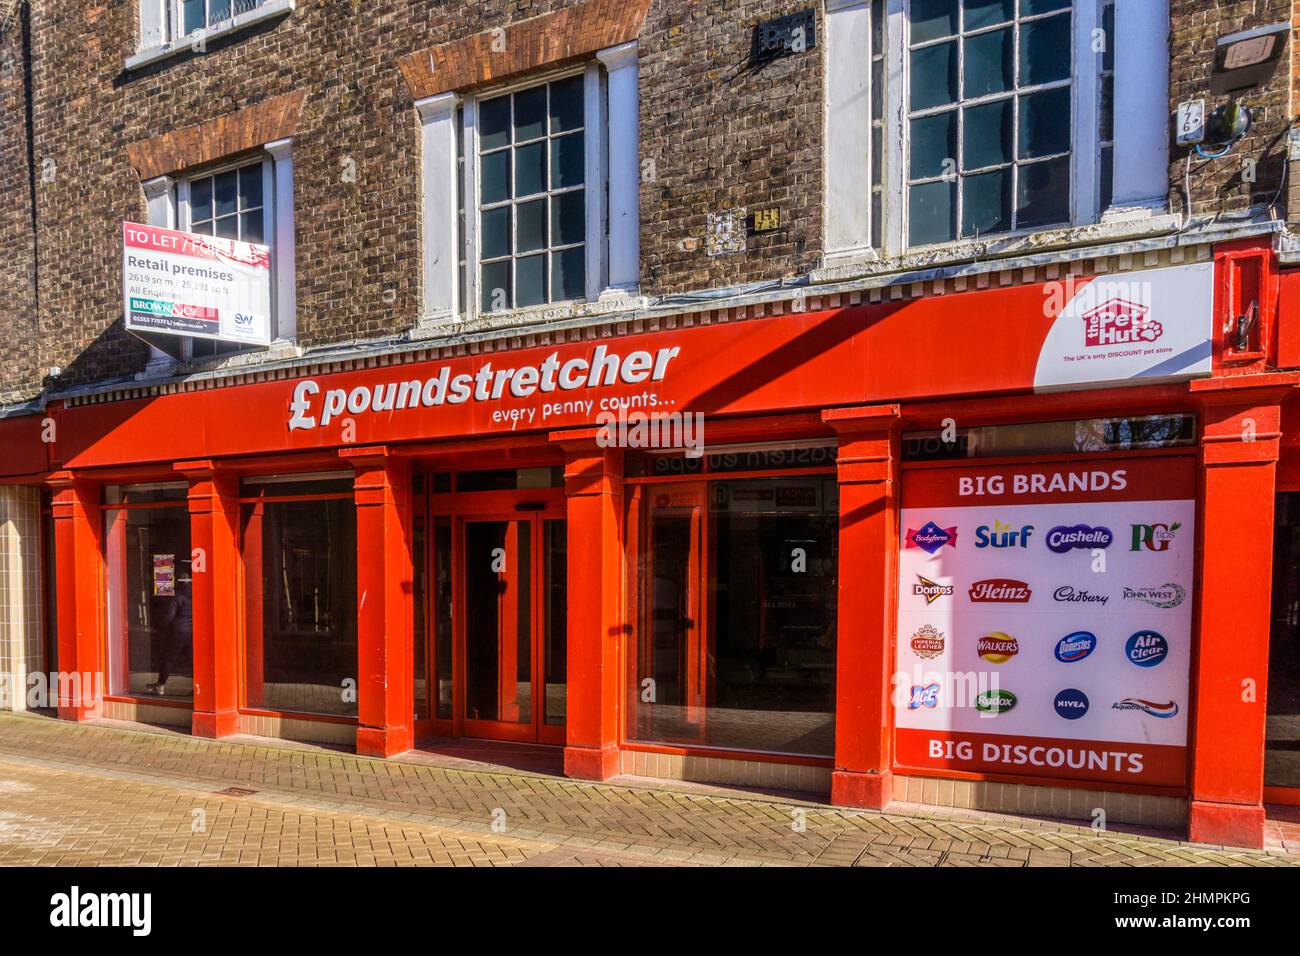 Empty ex Poundstretcher premises for sale or to let, in King's Lynn High Street. Stock Photo